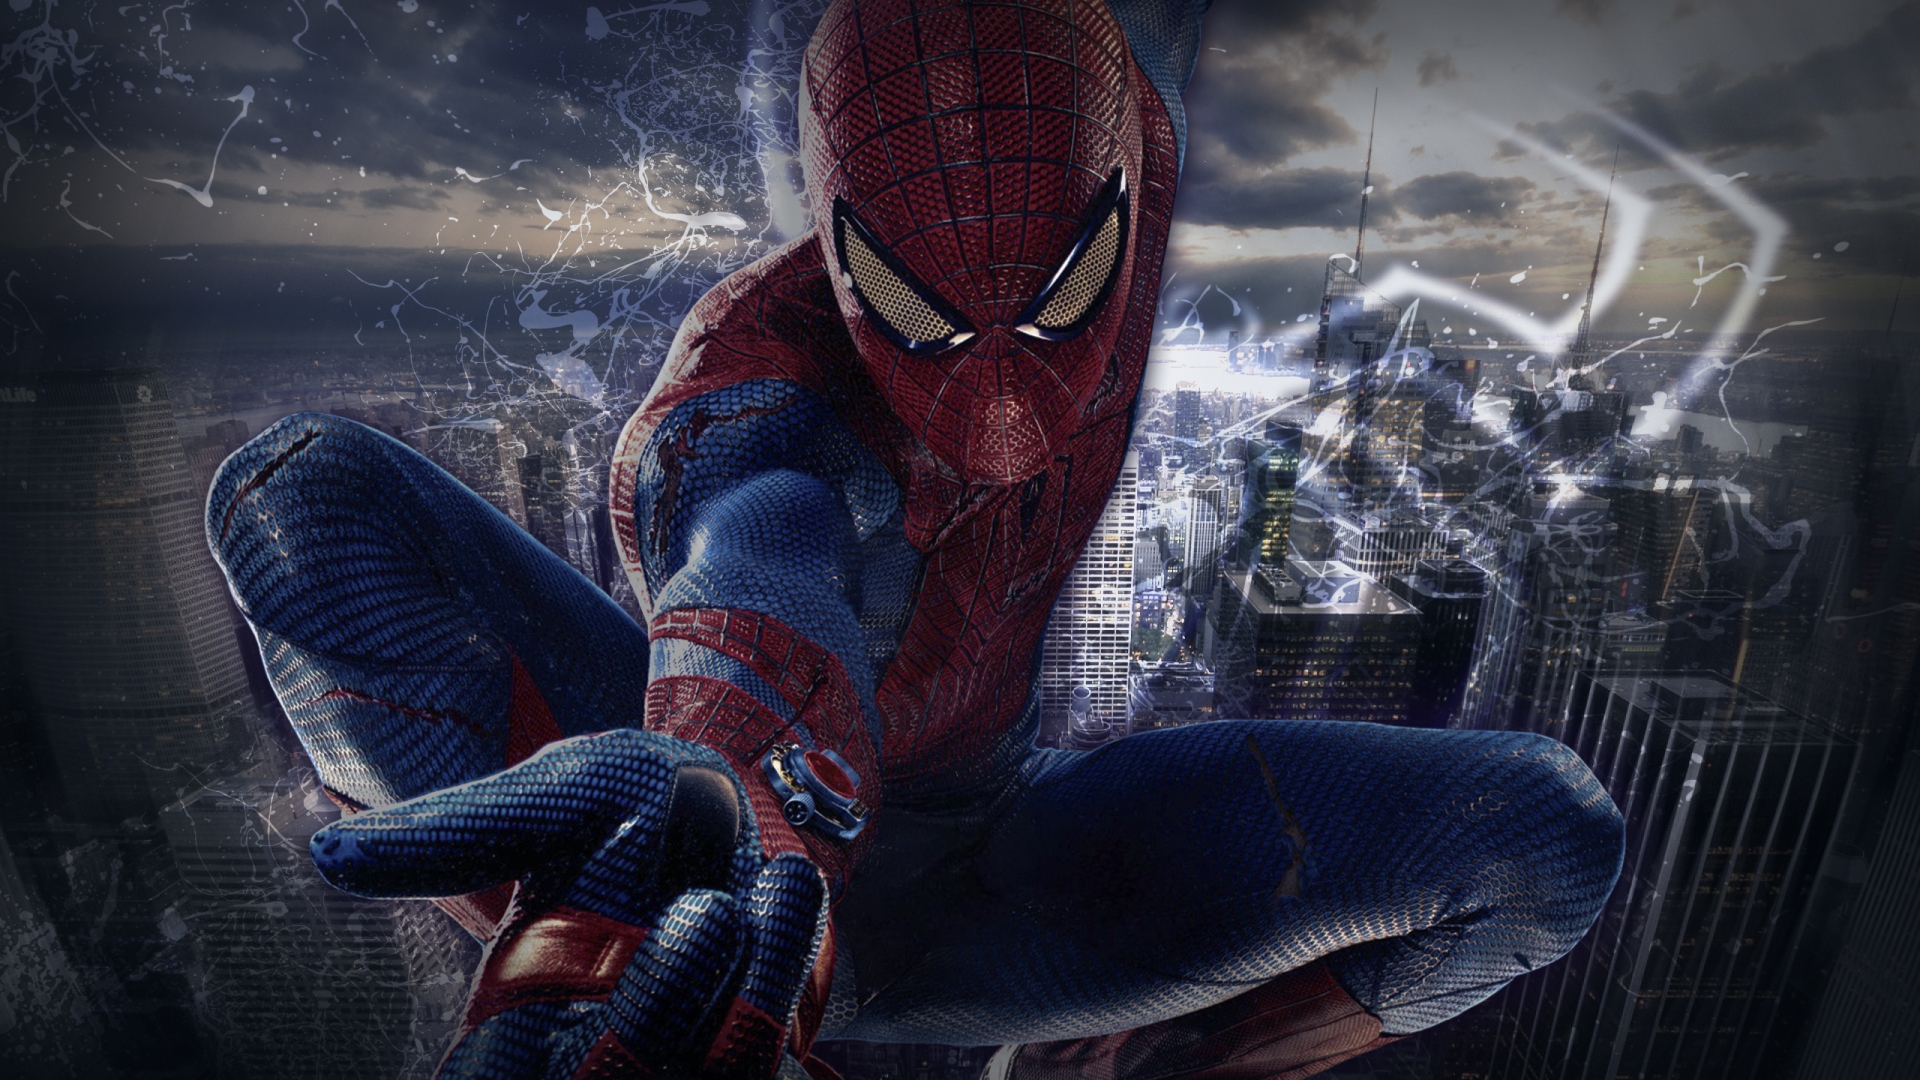 Spiderman Pose for 1920 x 1080 HDTV 1080p resolution